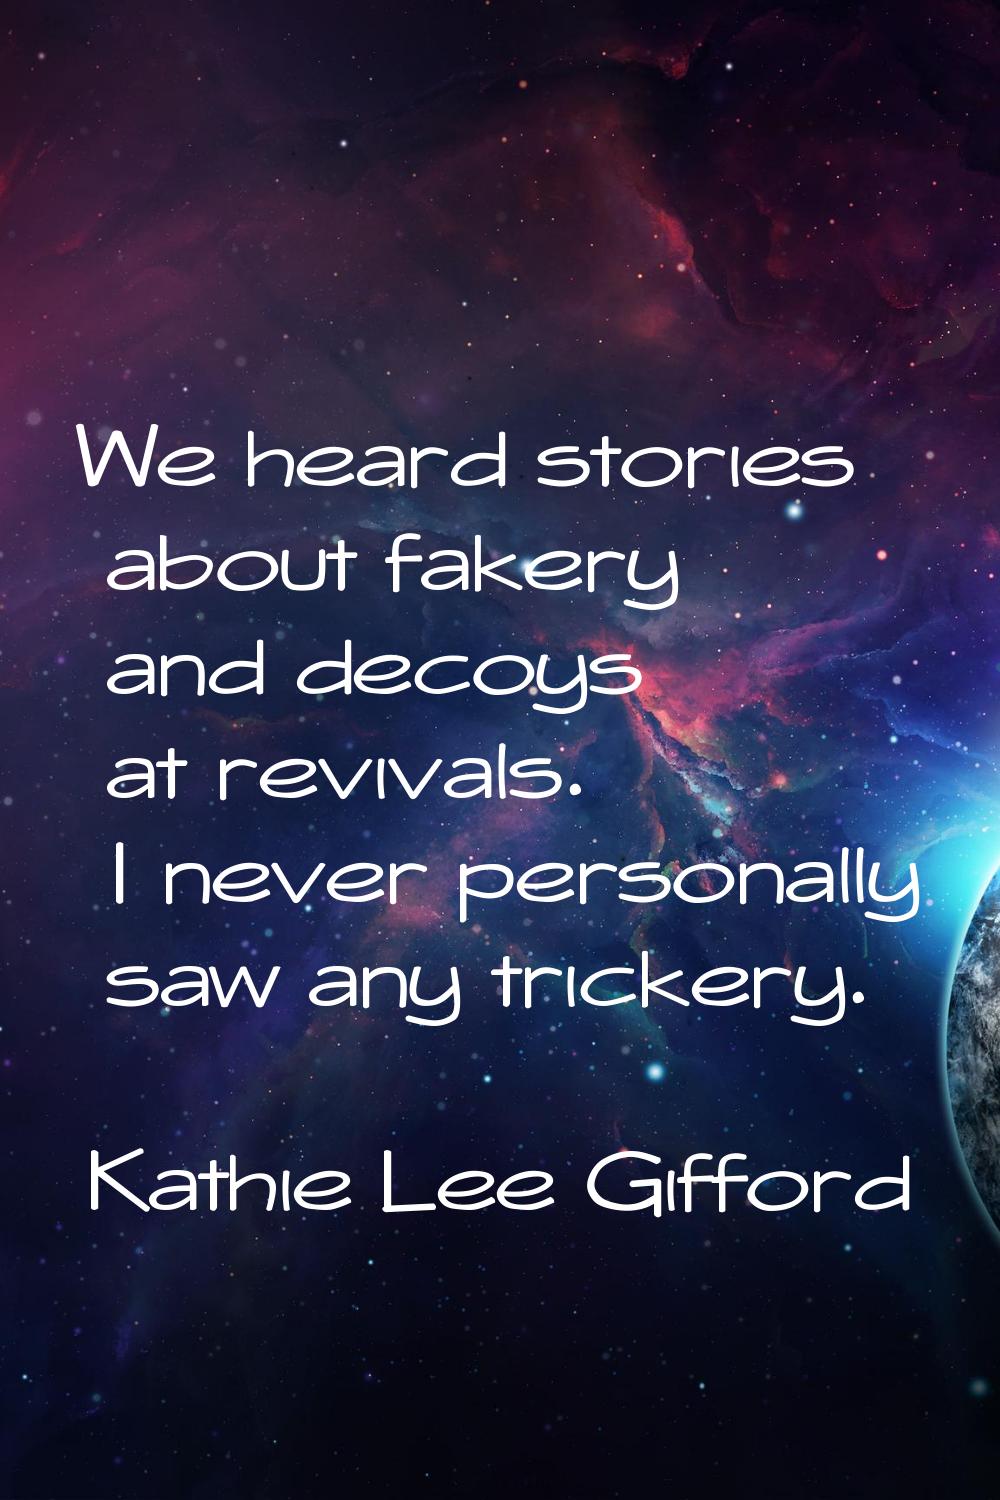 We heard stories about fakery and decoys at revivals. I never personally saw any trickery.